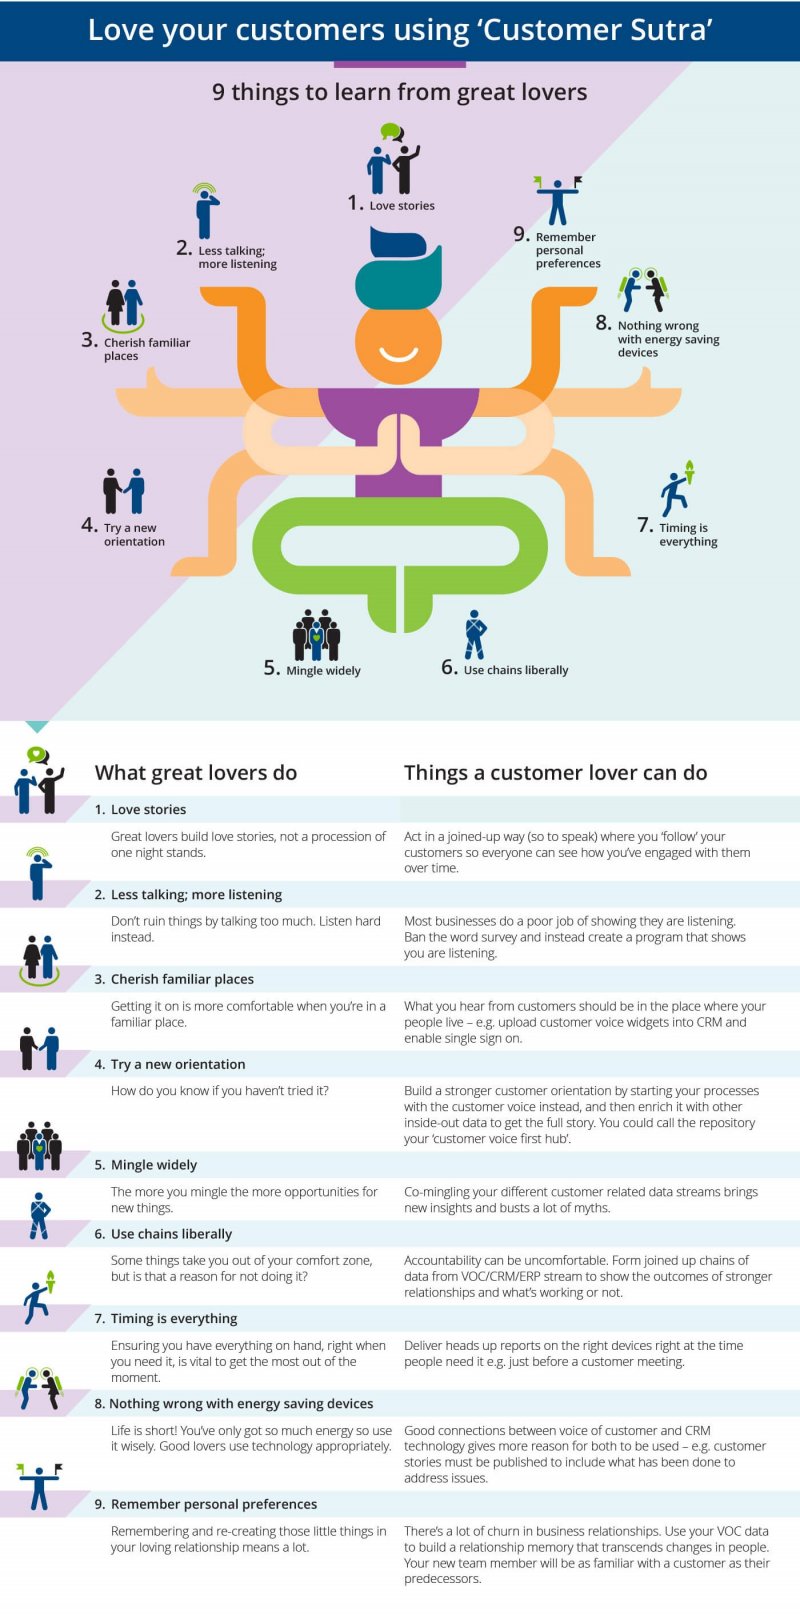 Love your customers with 'Customer Sutra'